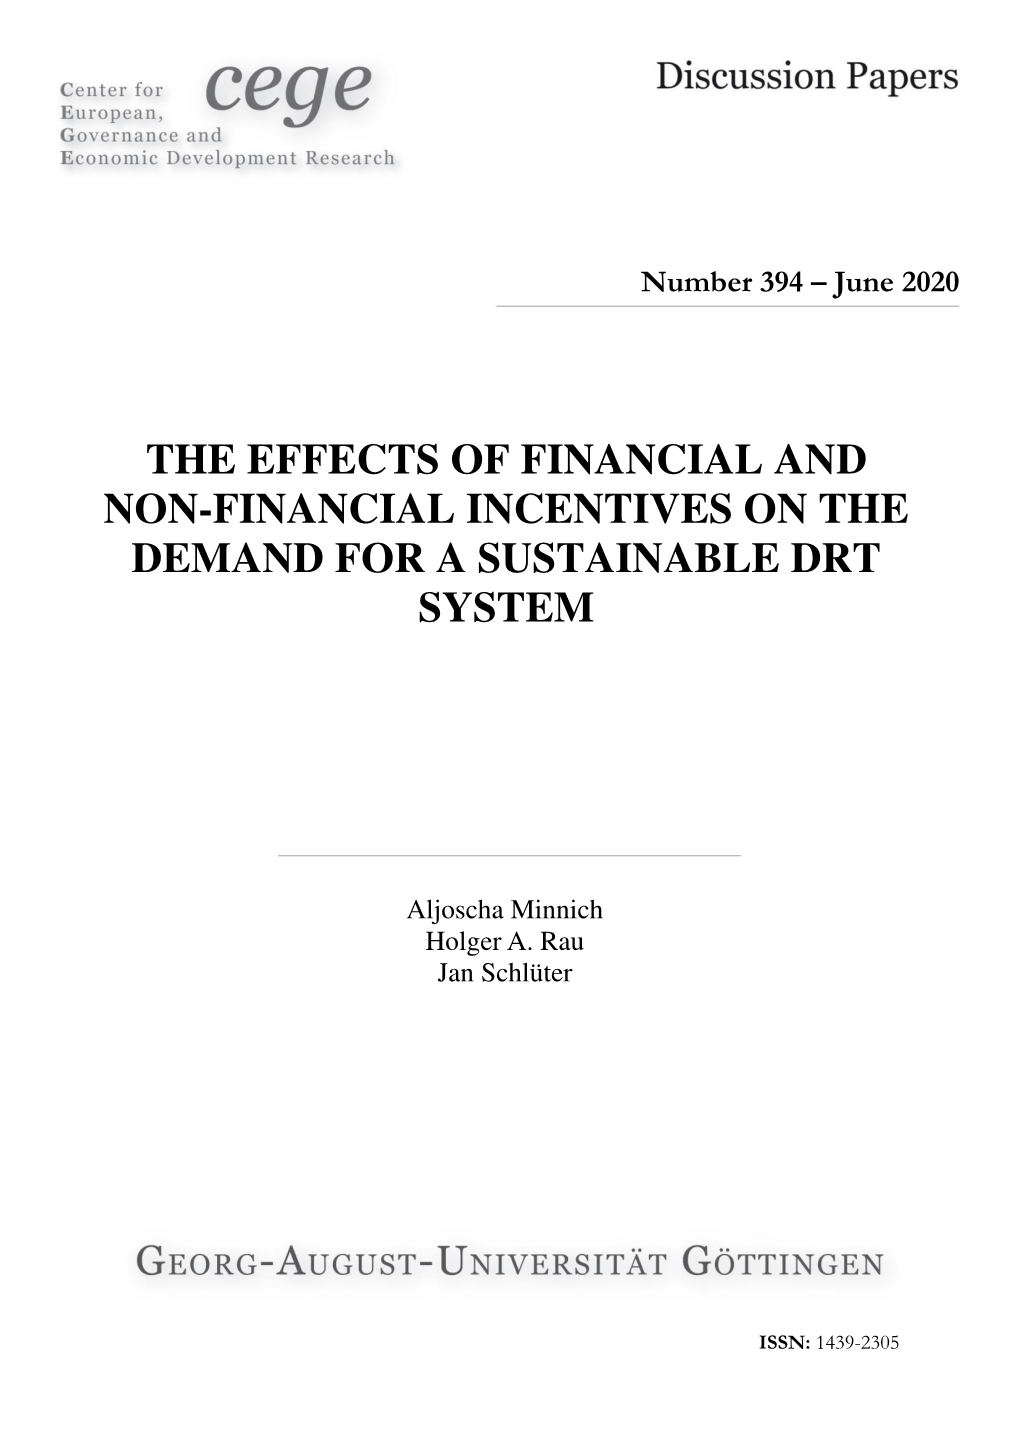 The Effects of Financial and Non-Financial Incentives on the Demand for a Sustainable Drt System